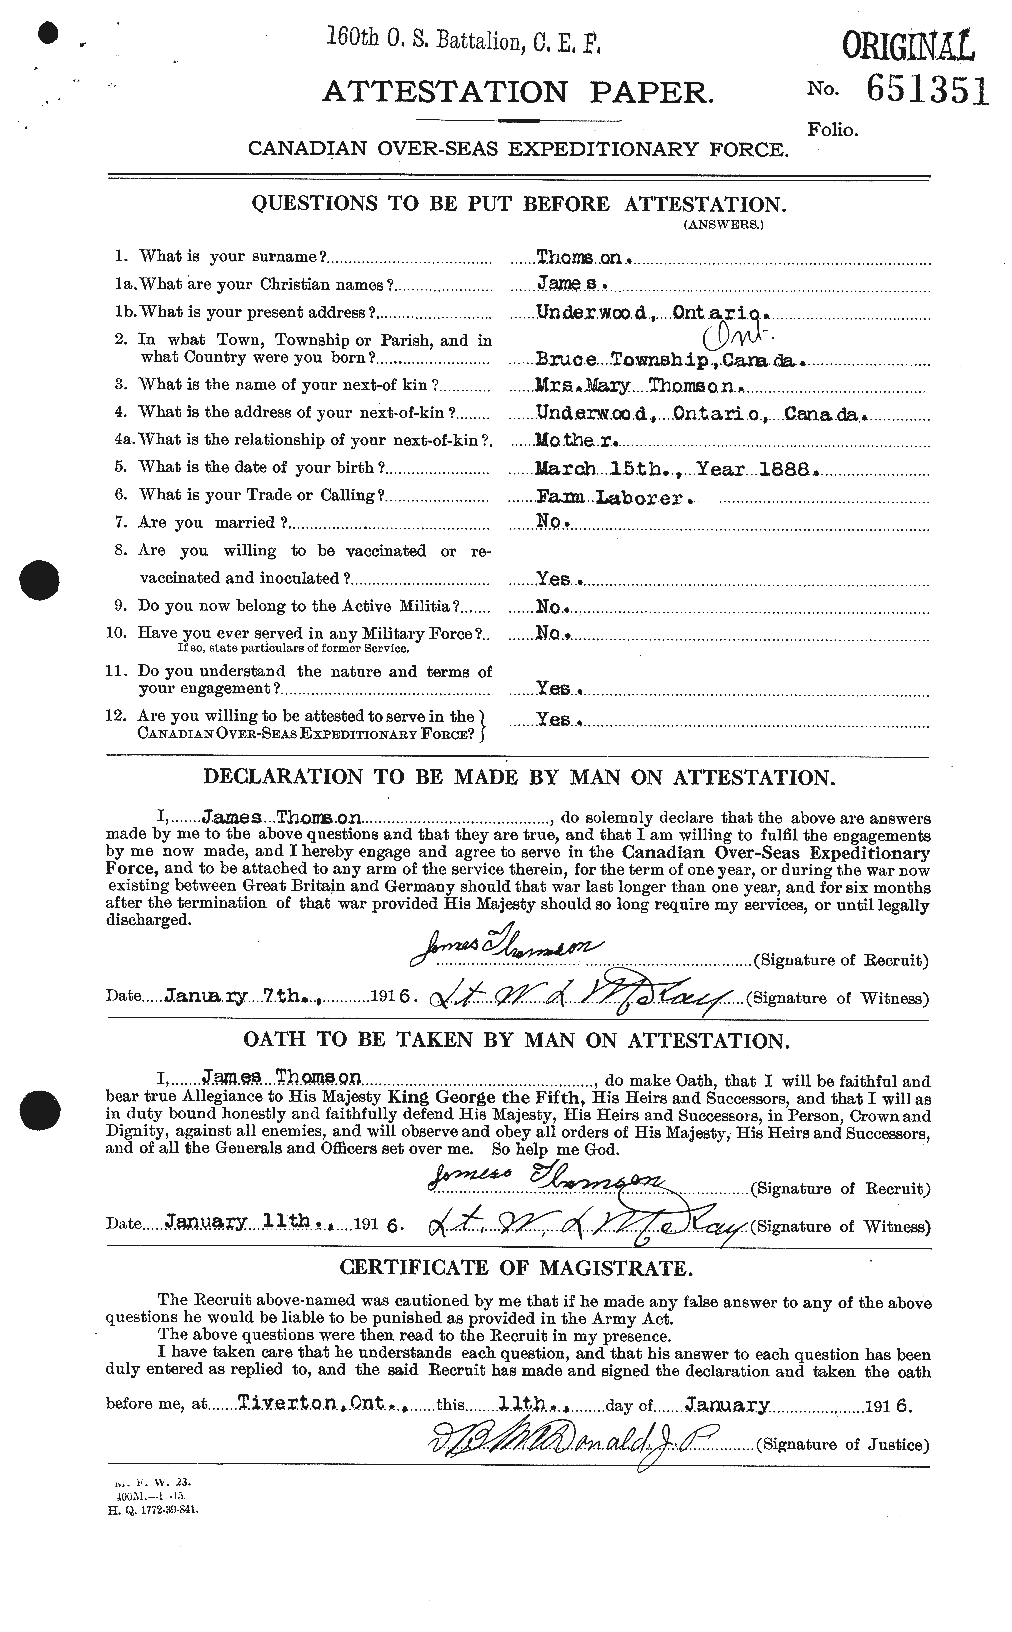 Personnel Records of the First World War - CEF 633799a